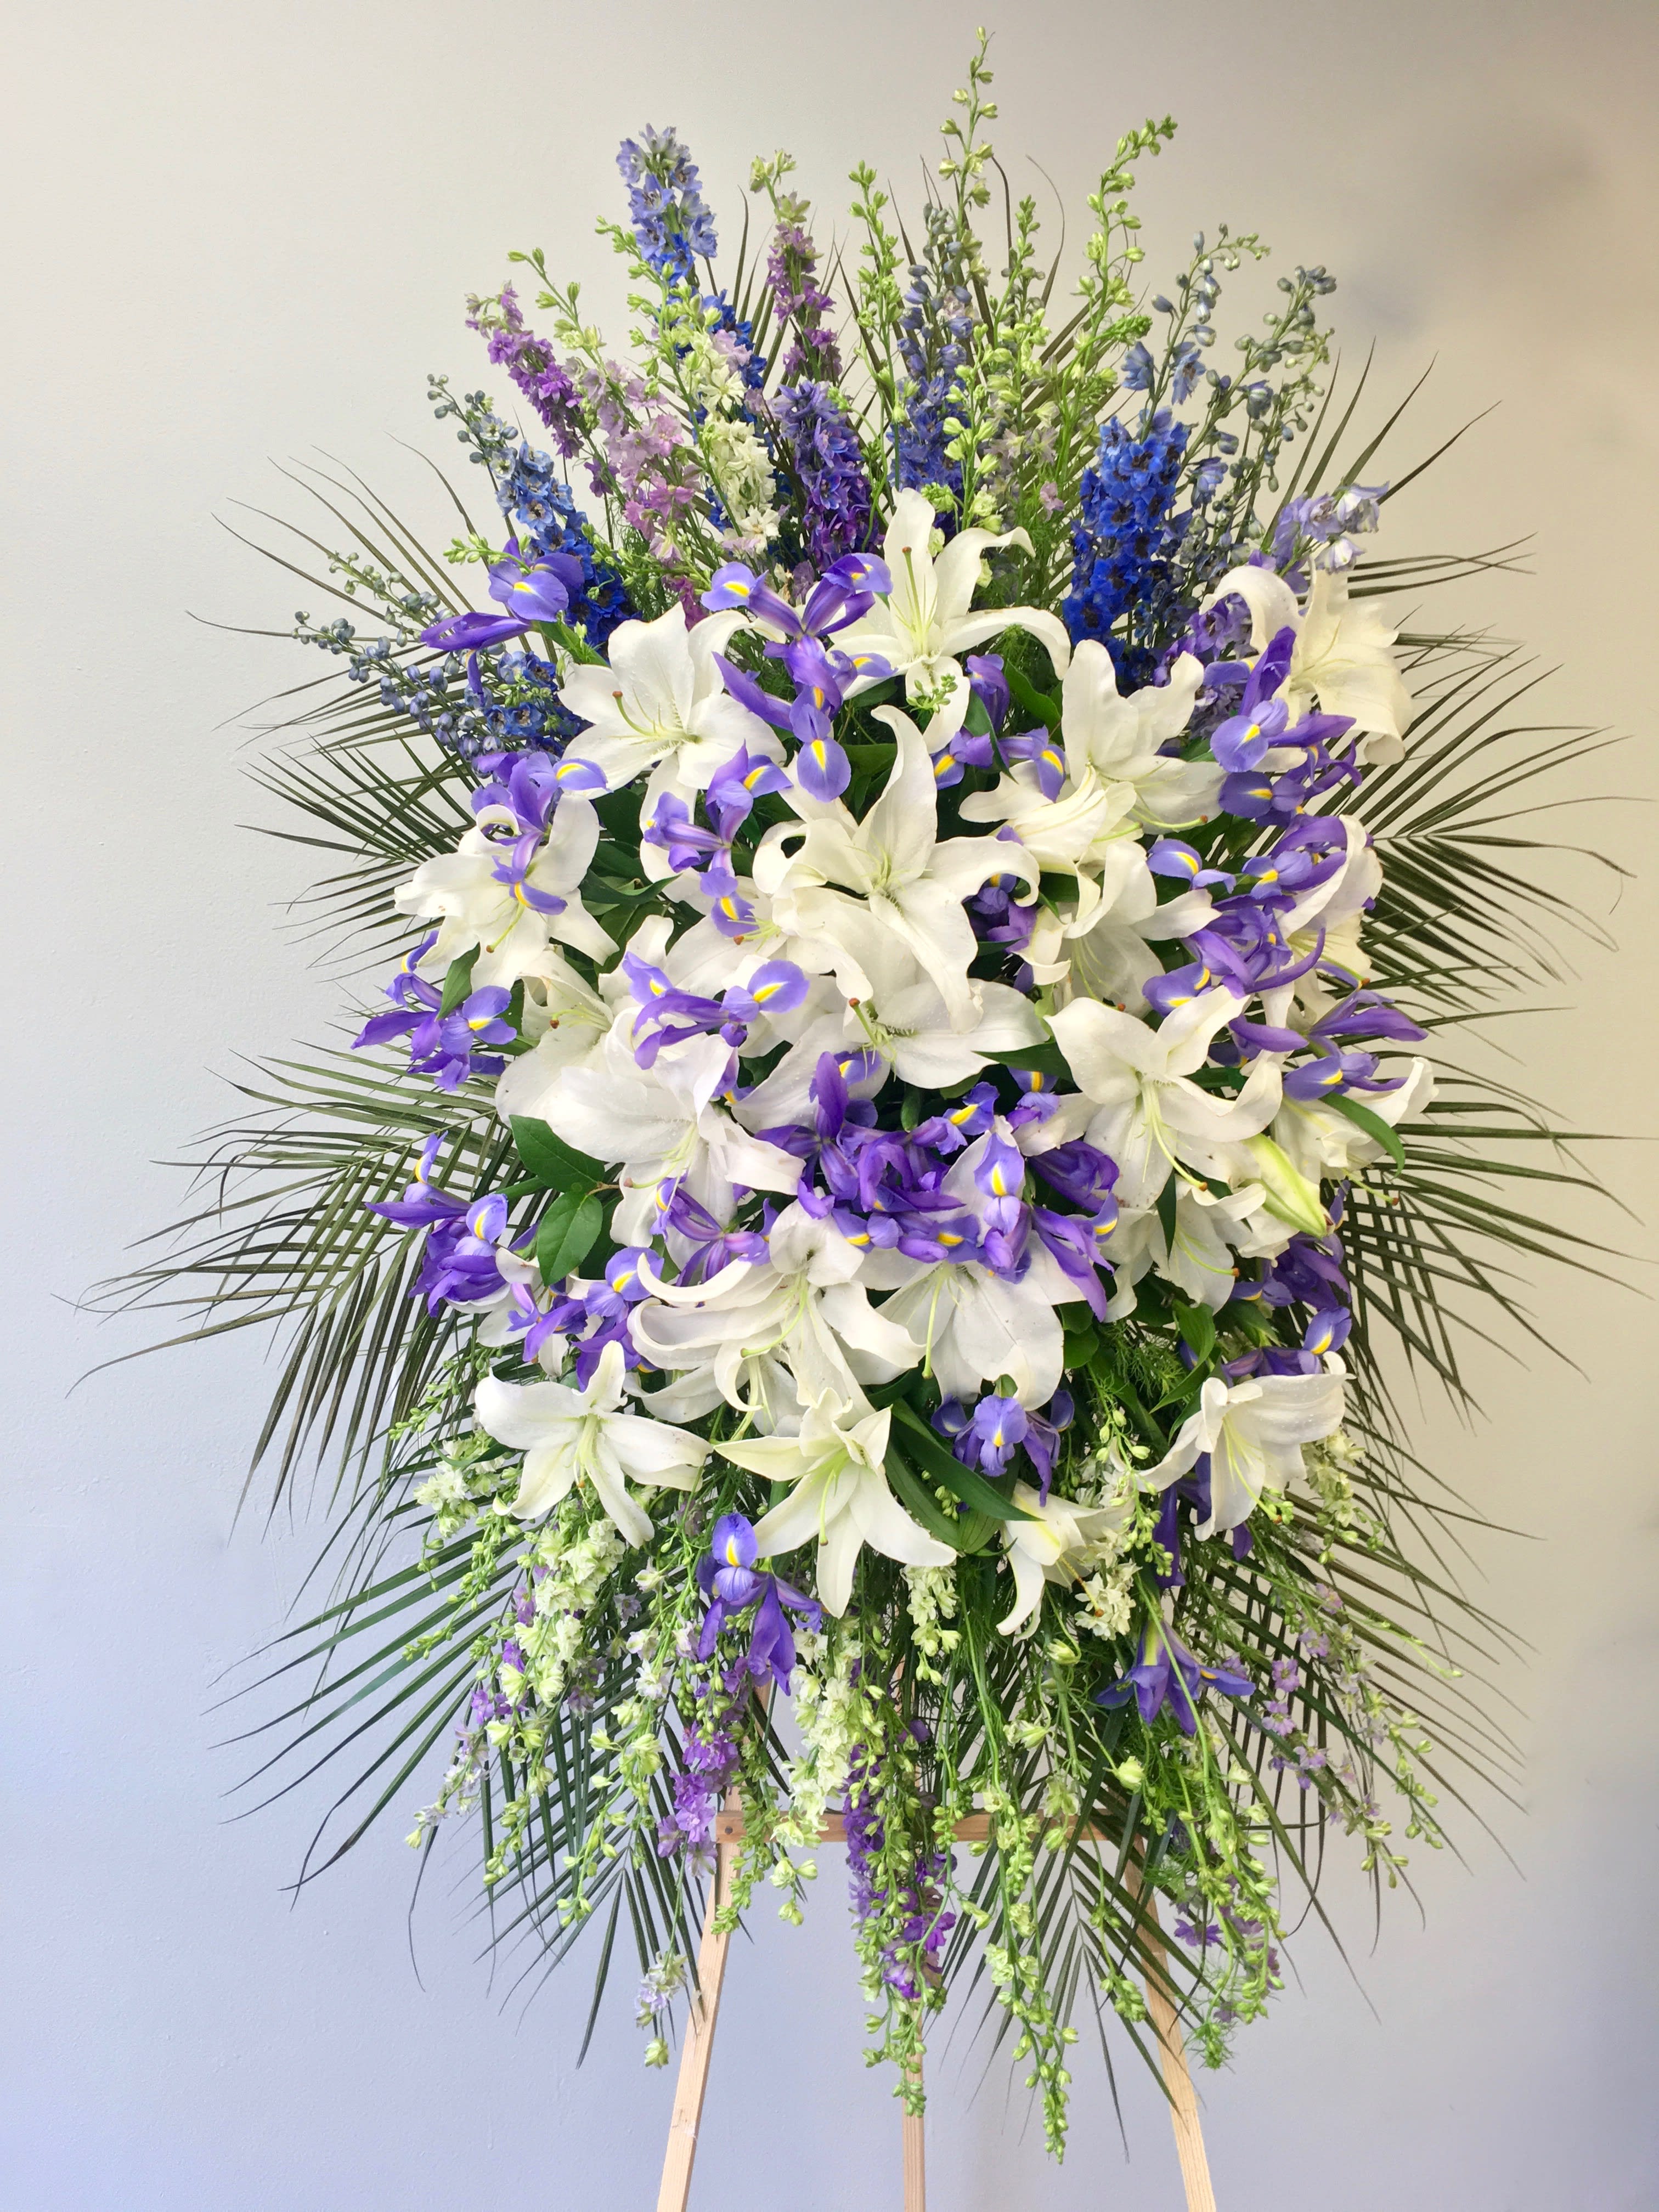 Lavender Iris Spray  - This spray includes a mix of lavender and purple florals, as well as bright stargazer lilies.   We include easel, printed banner and delivery (some fees may apply).  Standard size is 30'' wide, deluxe is 36'', and premium is 42''.